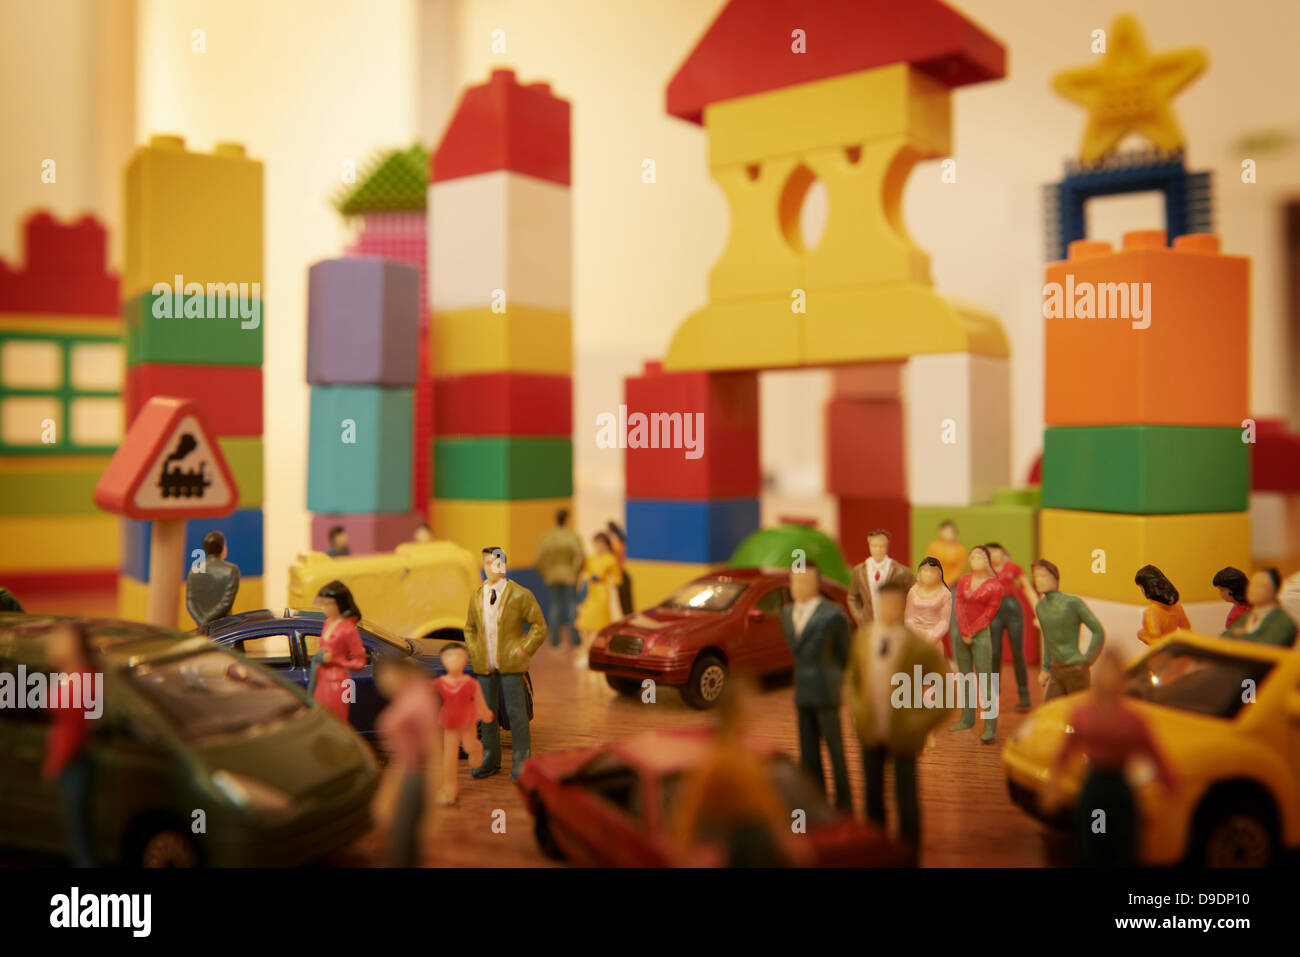 Toy cars and figurines in pretend plastic block town Stock Photo